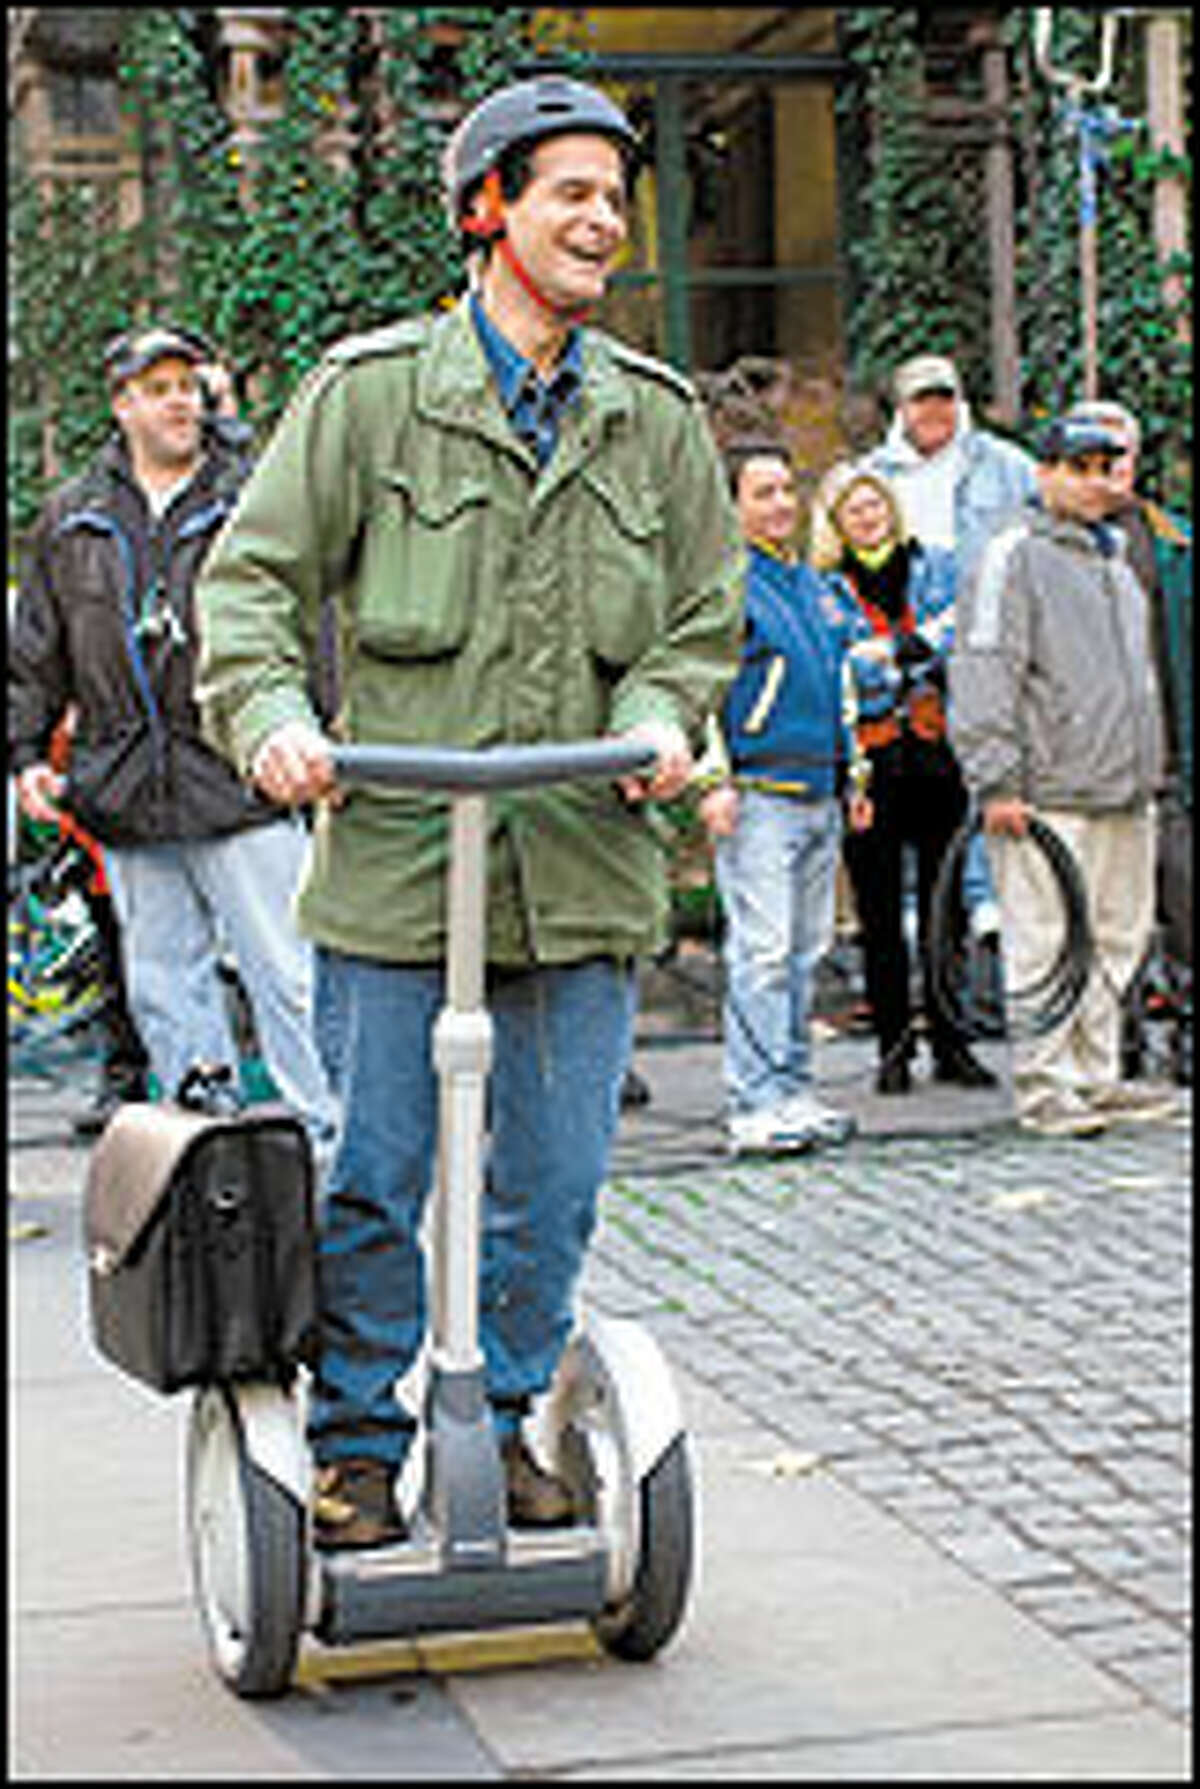 Inventor Dean Kamen shows off his Segway scooter, which goes 10 mph.